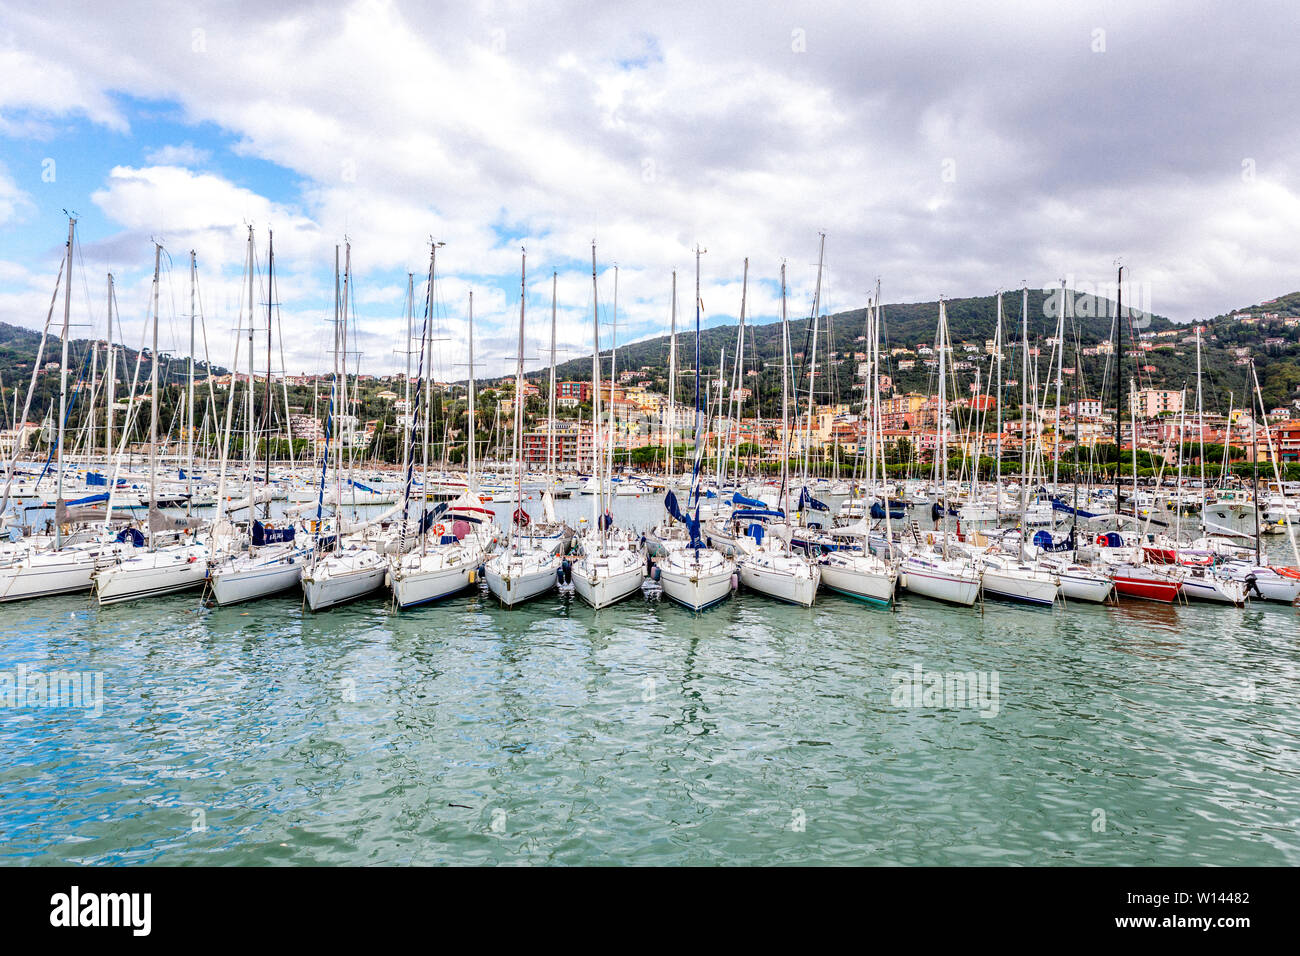 Sailboats neatly in a row in the harbour and houses on the hills, against cloudy sky in Lerici in Liguria, Italy Stock Photo